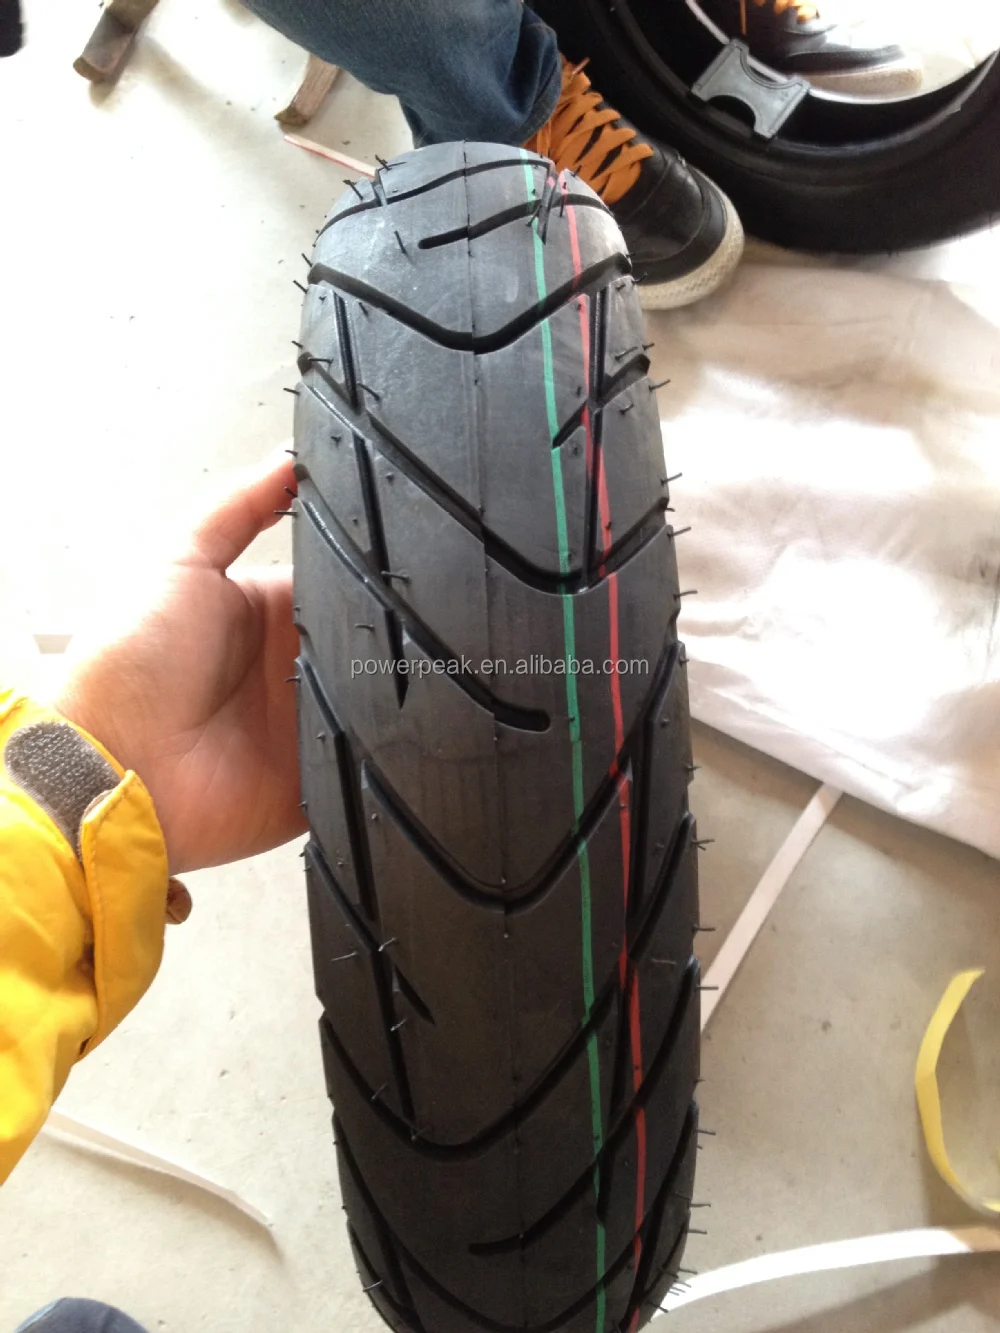 90 90 10 90 90 12 100 90 12 Scooter Tires Tubeless 6pr Buy 90 90 10 Scooter Tires Tubeless Scooter Tires Tubeless Scooter Tires Tubeless 90 90 12 Product On Alibaba Com